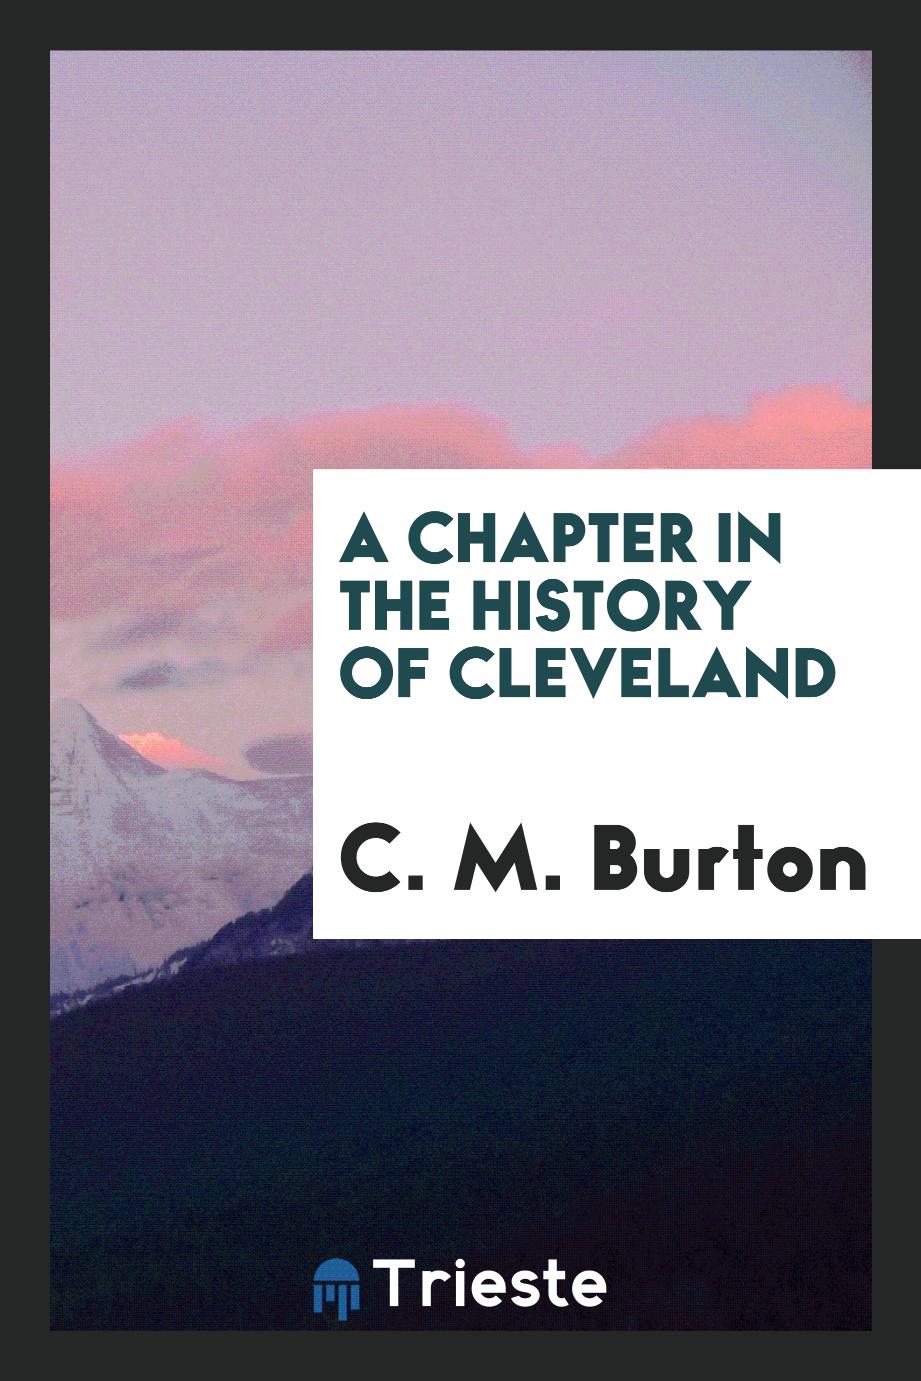 A Chapter in the History of Cleveland